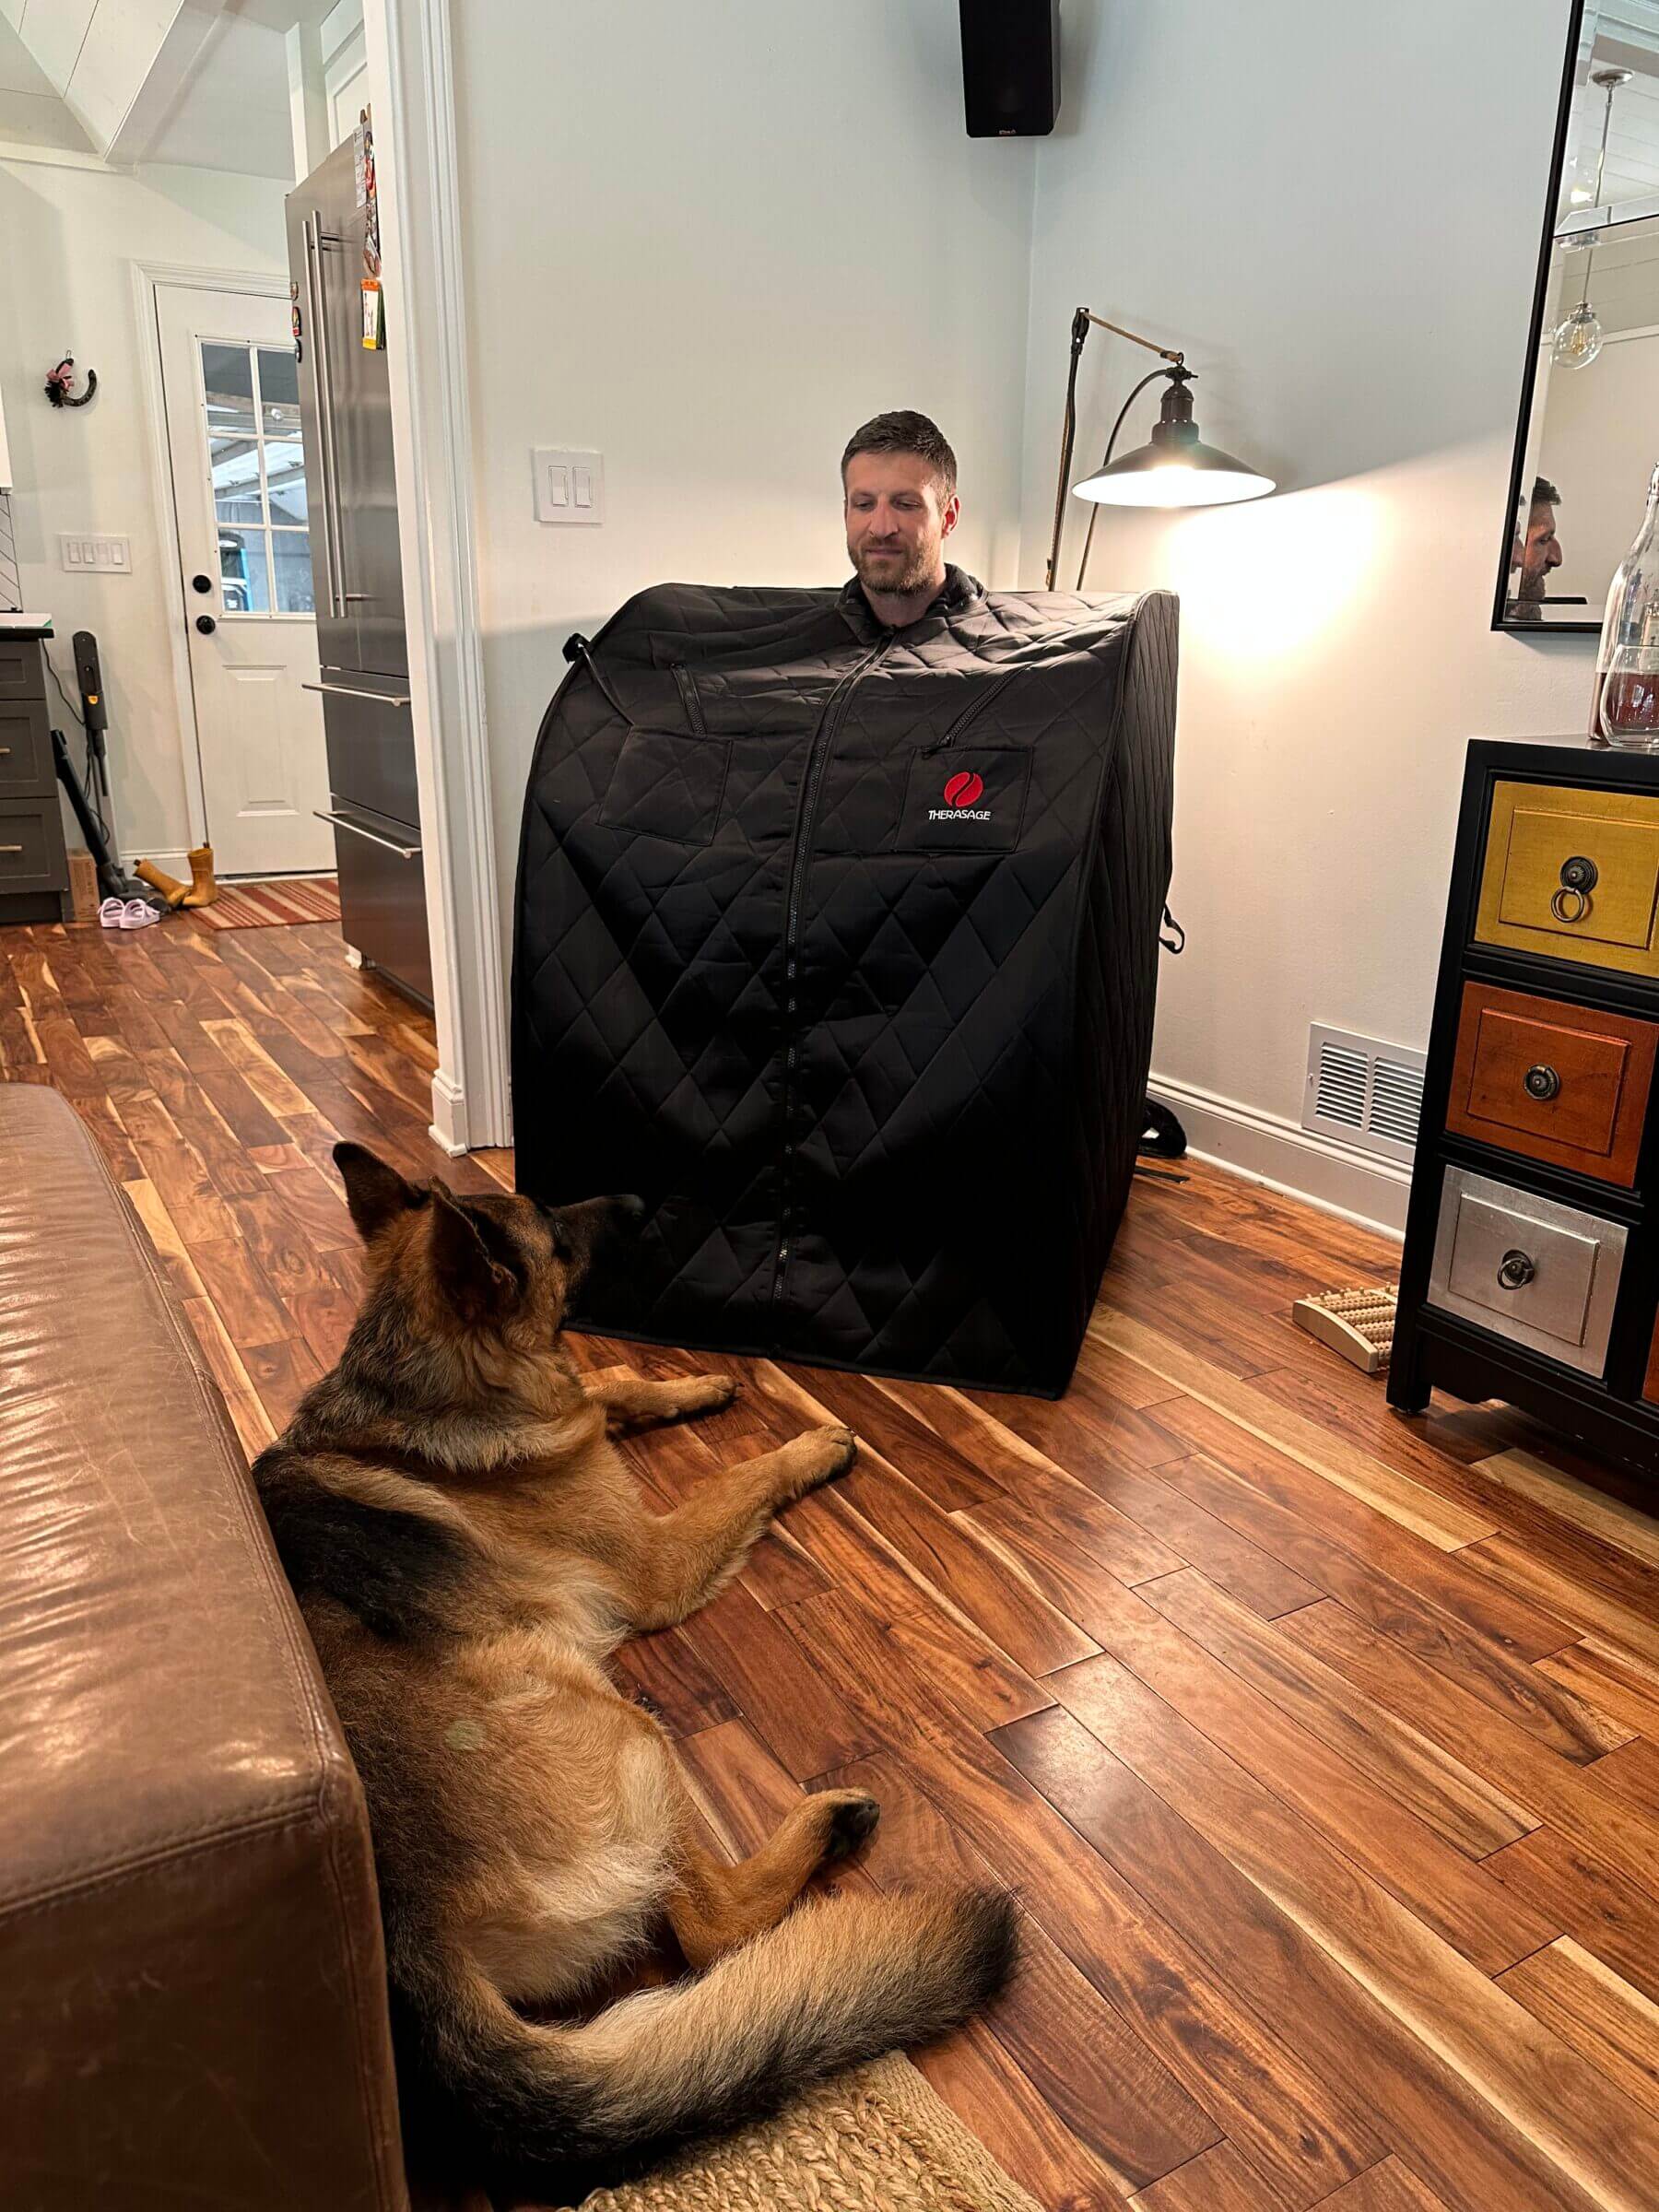 Our German Shepherd takes his protection duties very seriously.